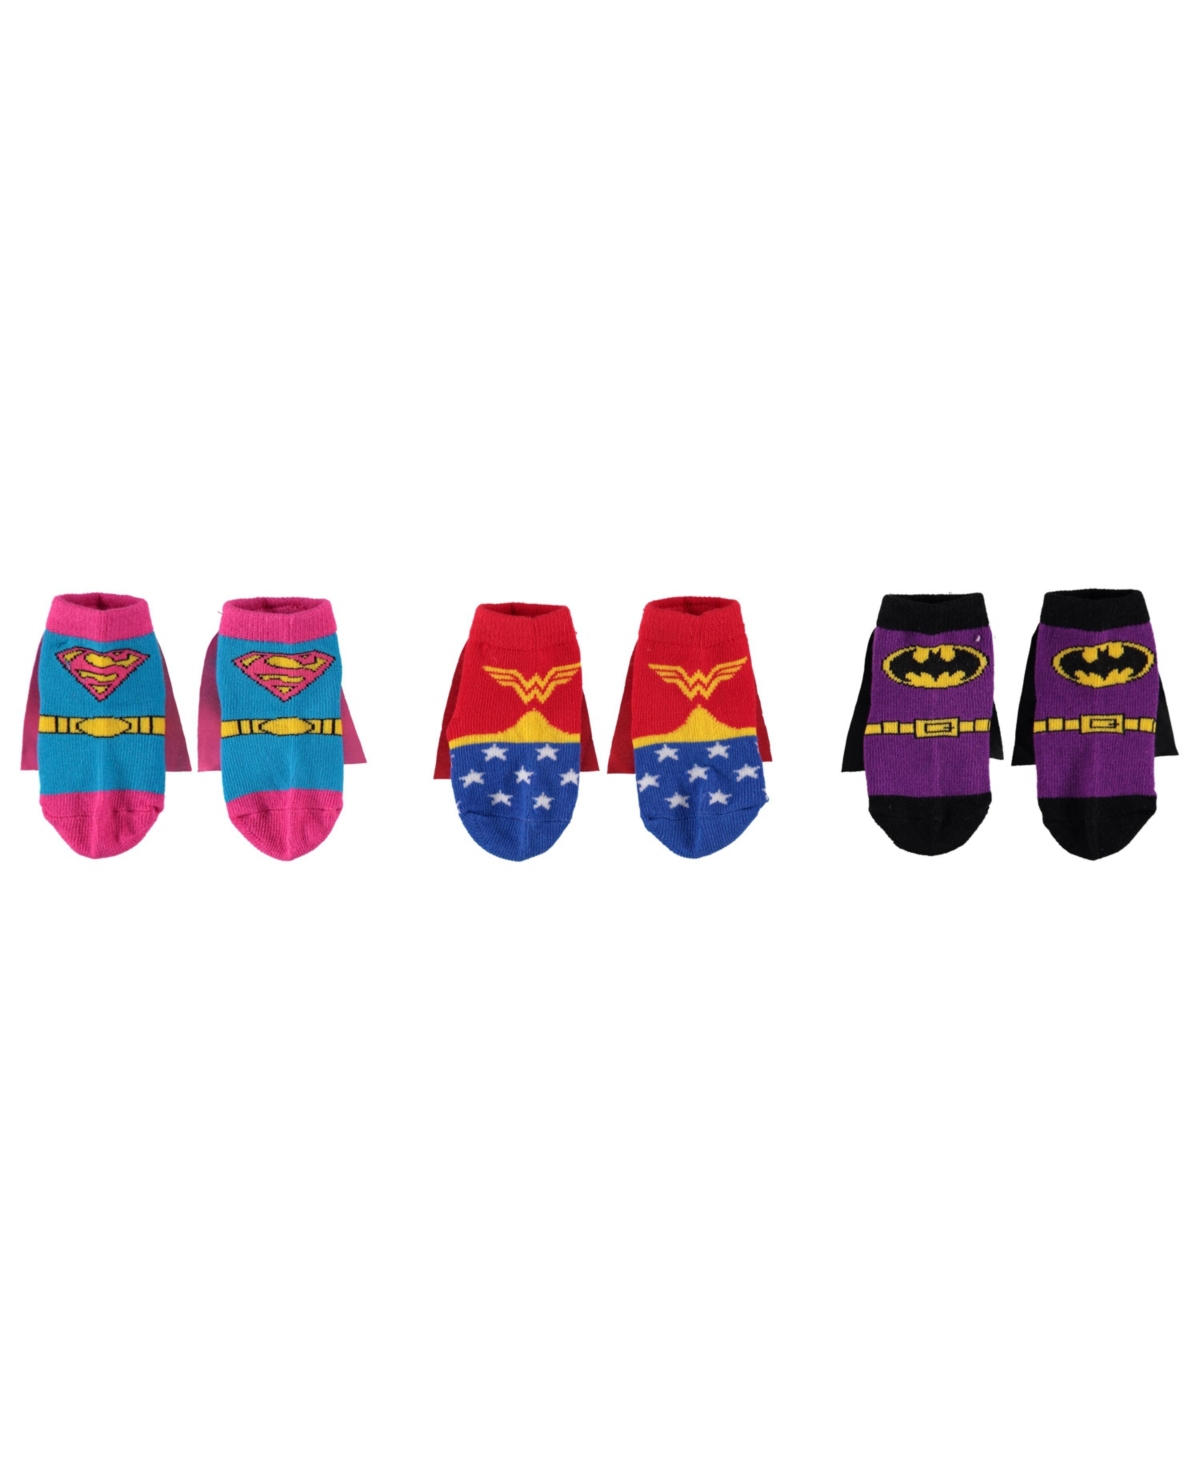 Happy Threads Baby Girls Superhero Socks, Pack Of 3 In Assorted Colors